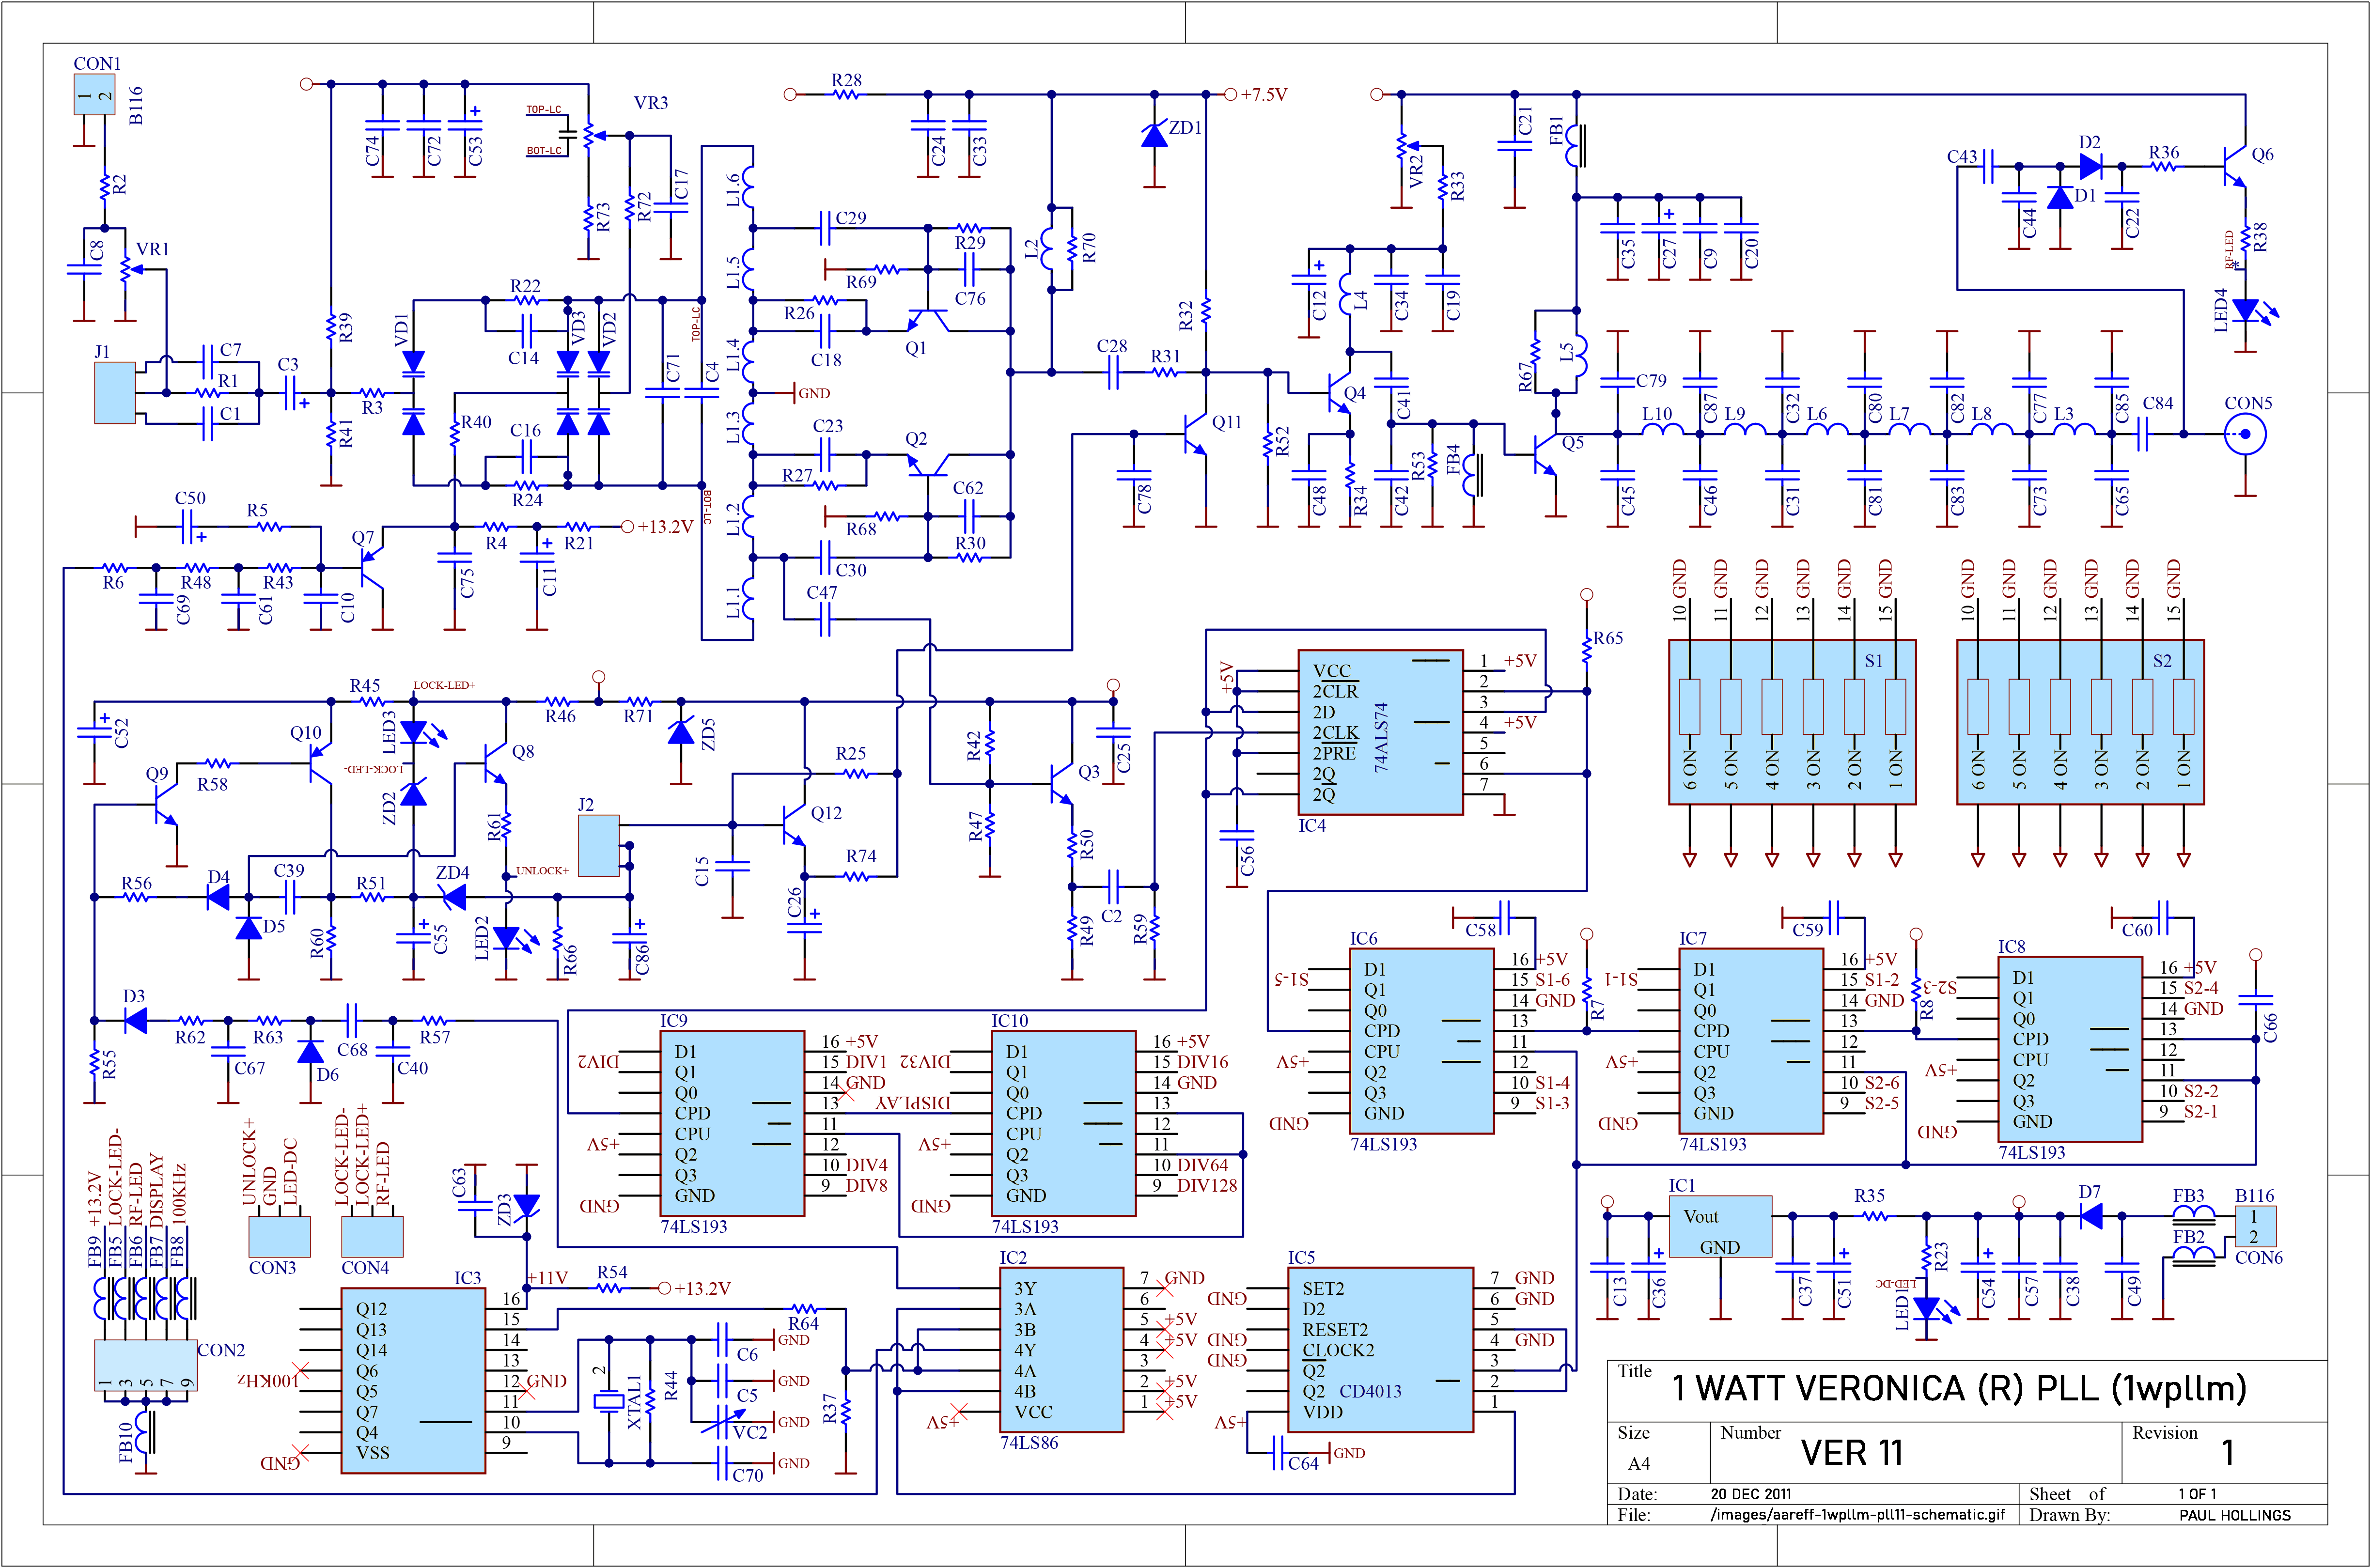 Veronica 1W PLL FM Transmitter Version 11 PCB Layout designed by Paul Hollings